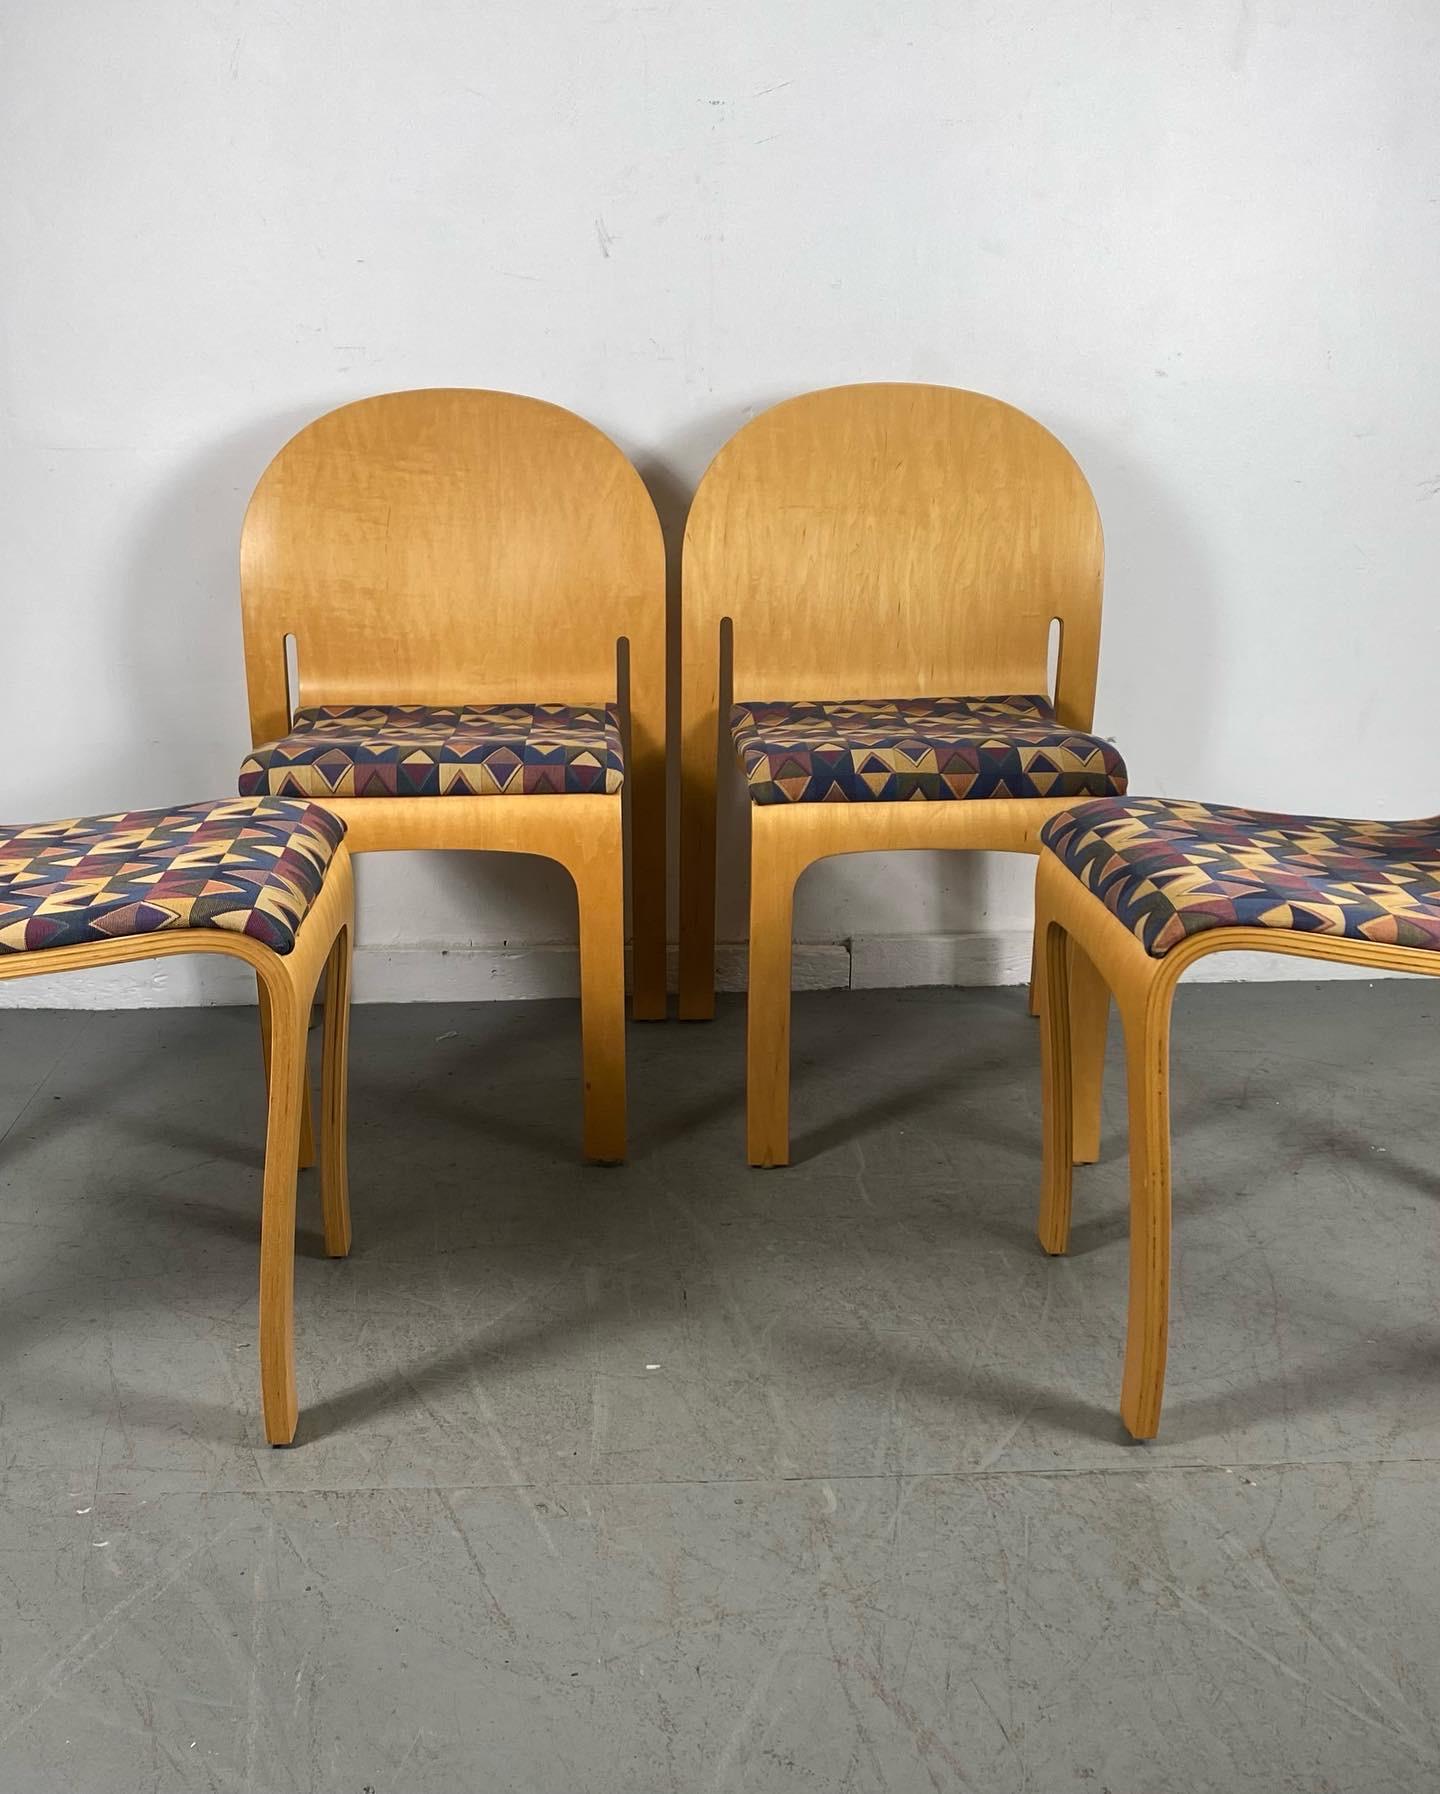 Classic Bent Plywood Side Chairs Body Form by Peter Danko 1